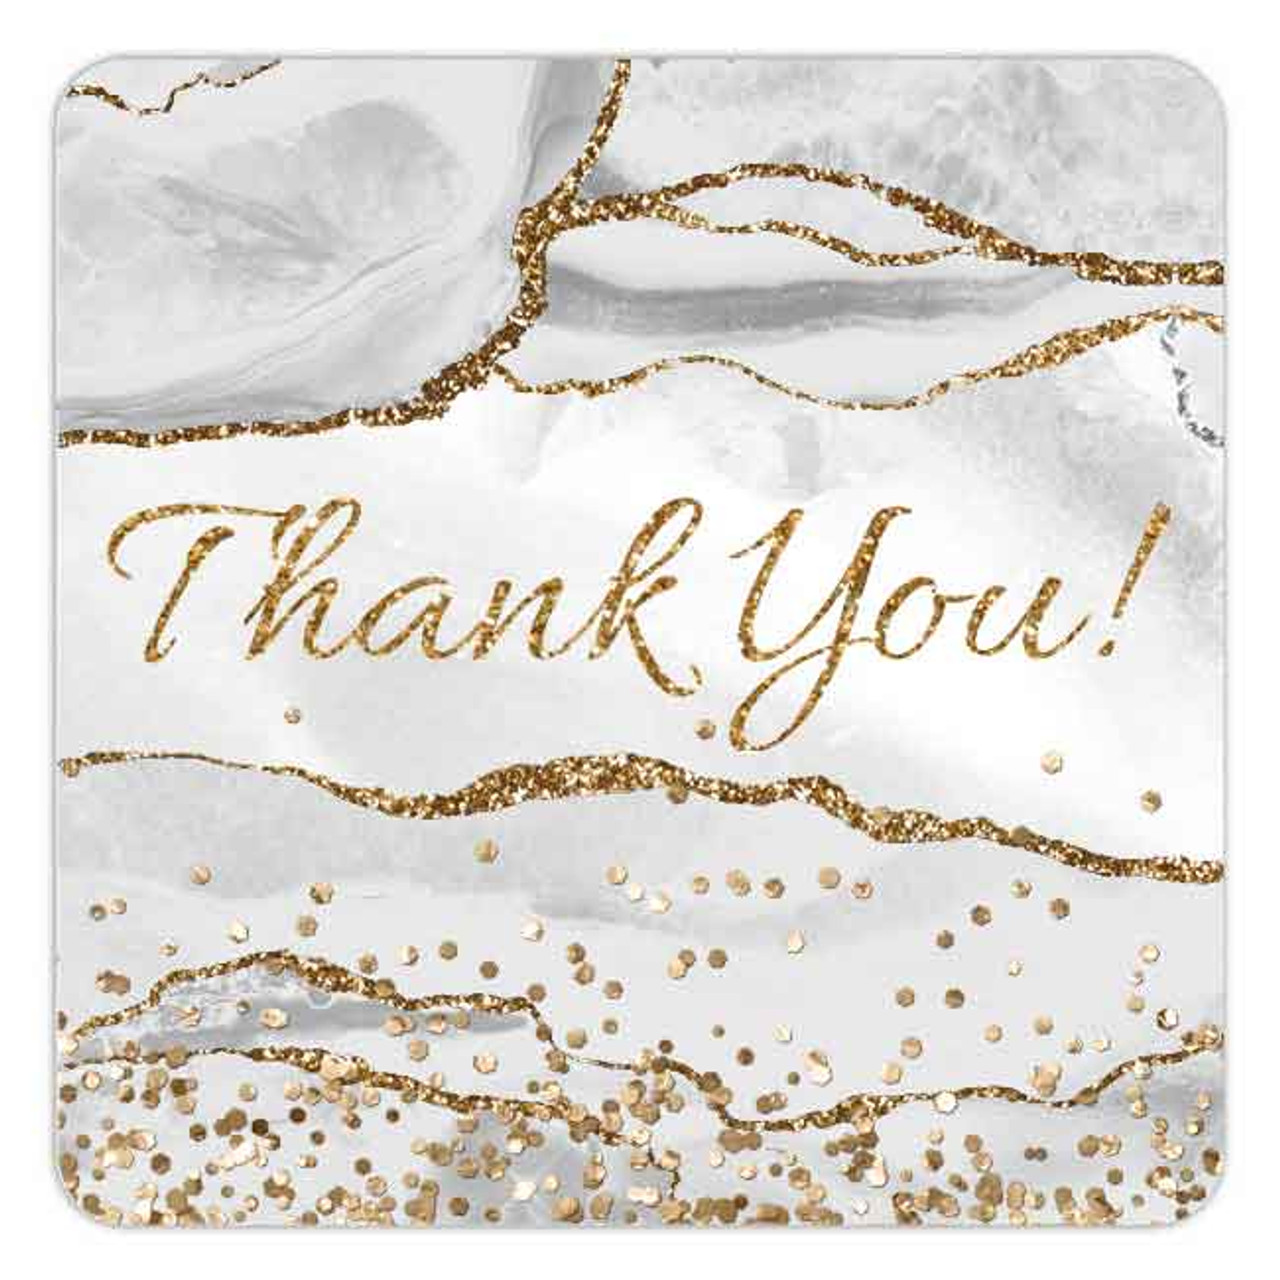 Turquoise Thank You Wedding Stickers